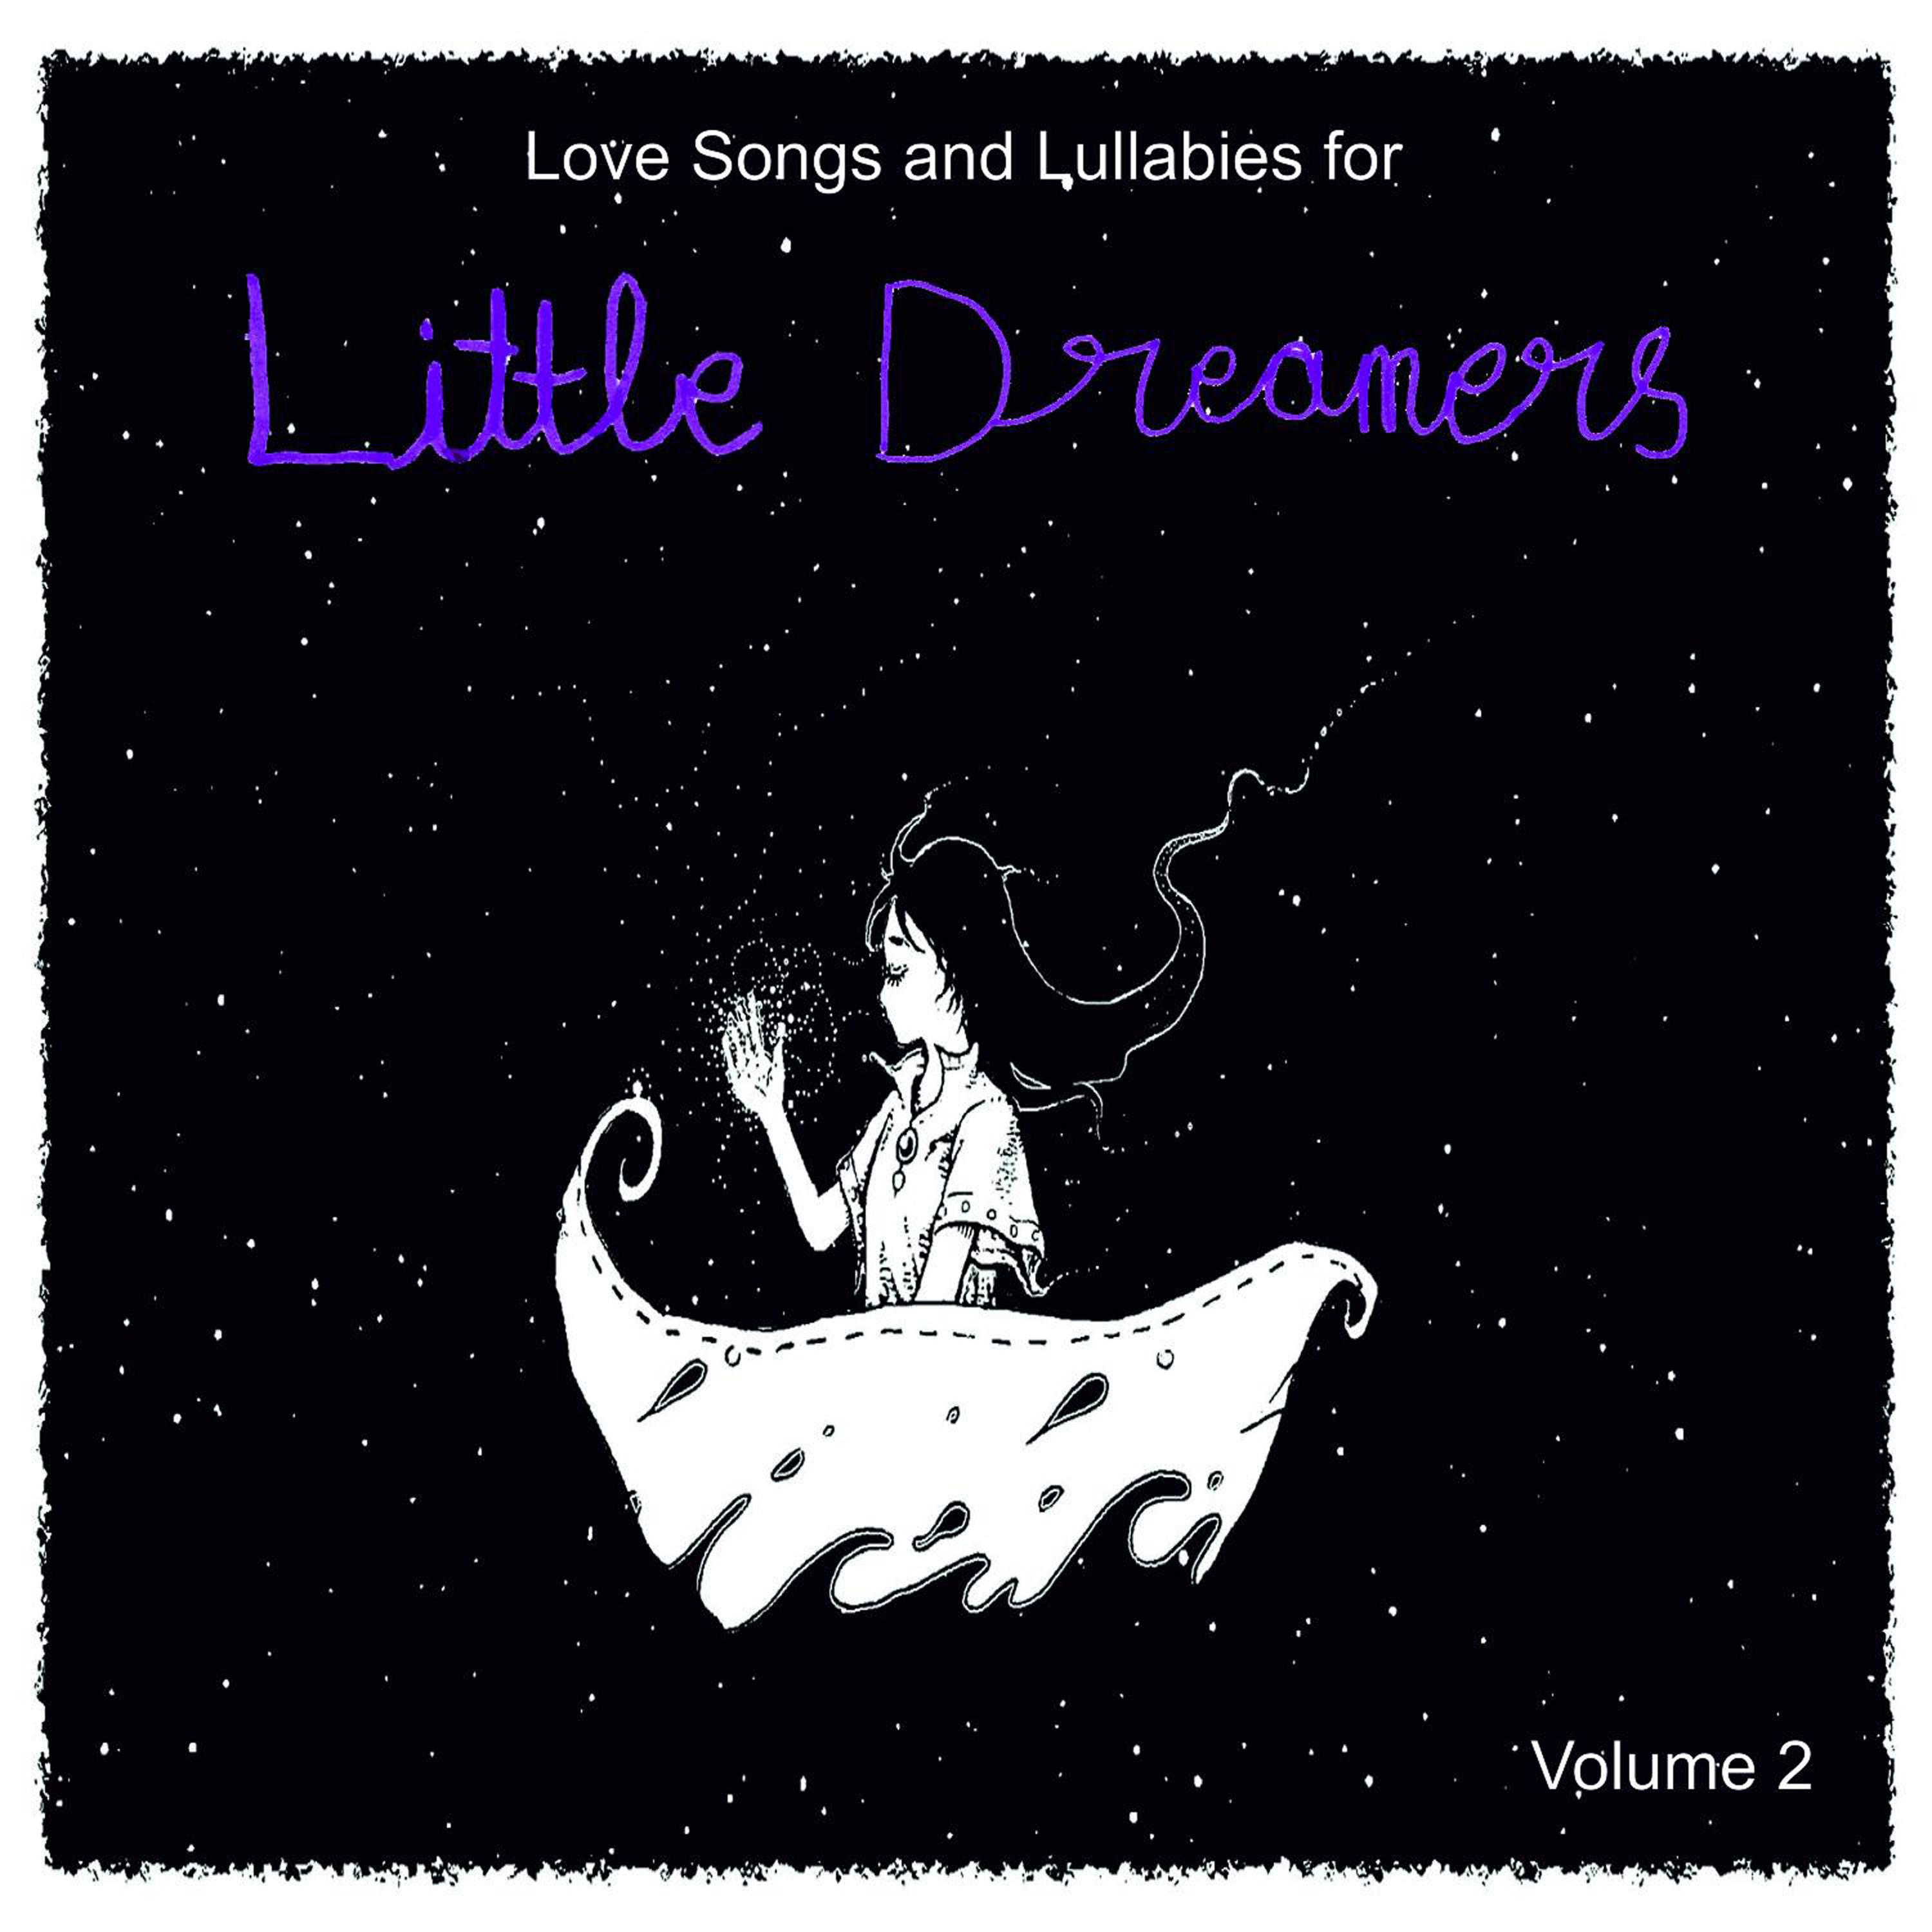 Love Songs and Lullabies for Little Dreamers Vol. 2